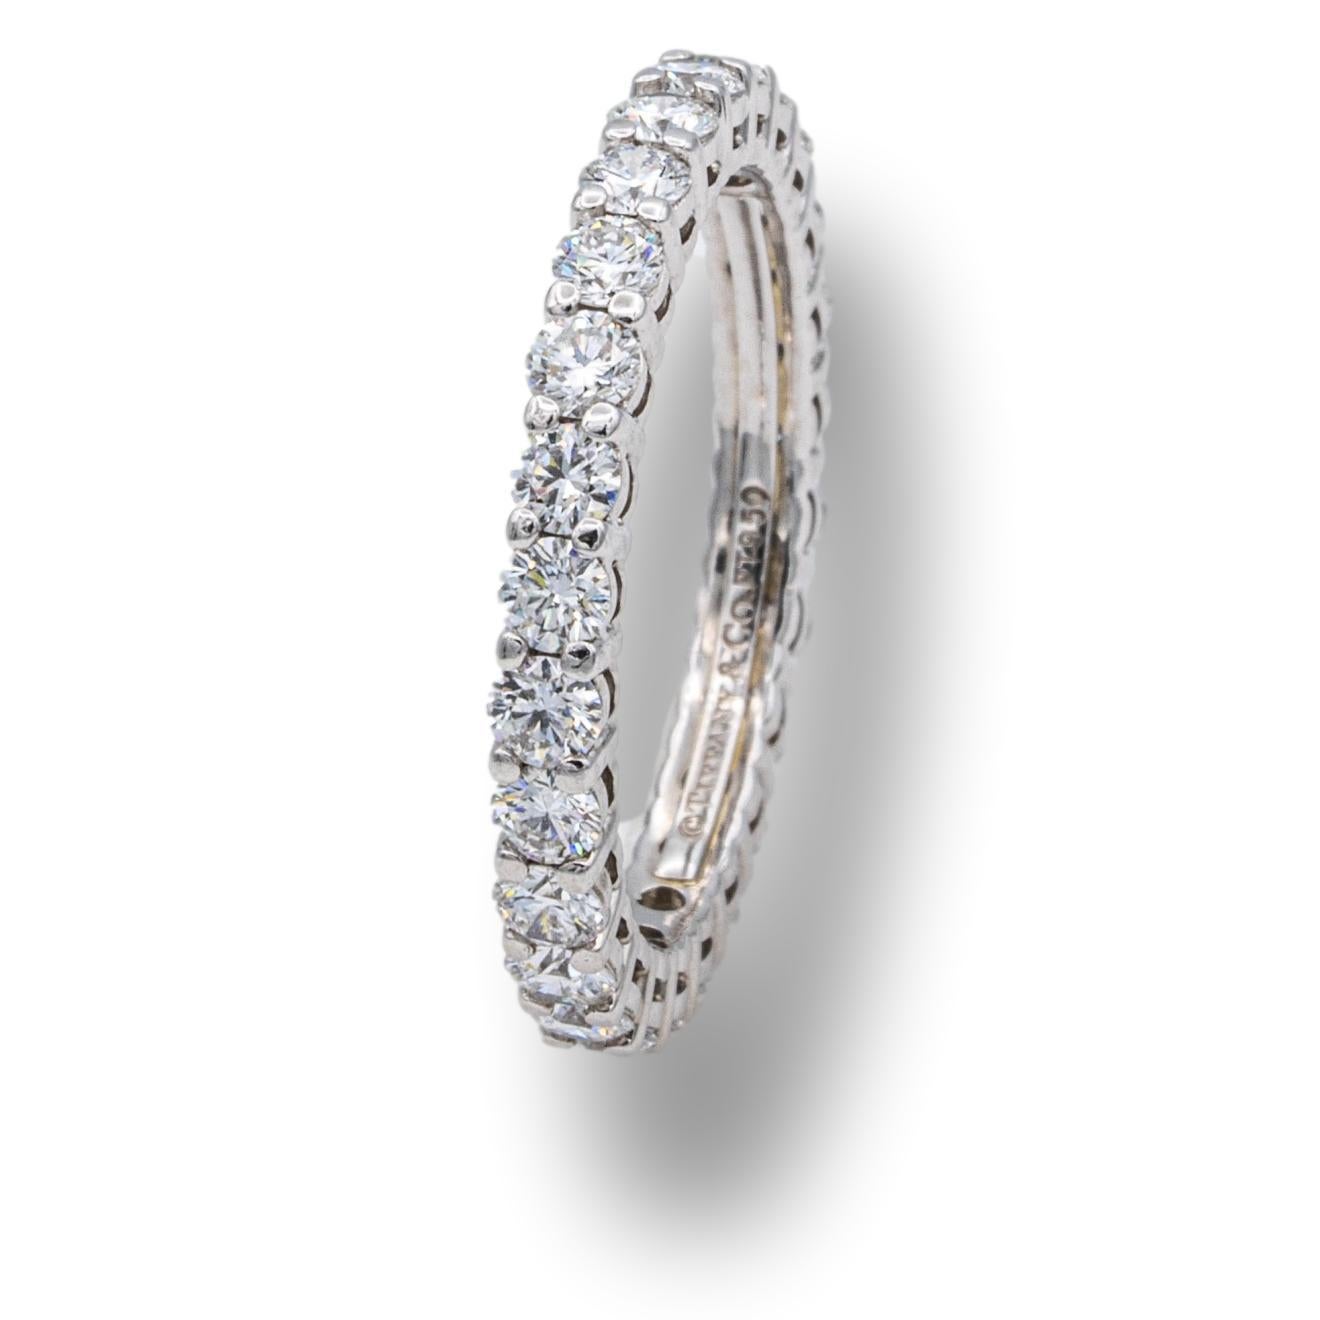 Tiffany & Co. Eternity band from the Embrace collection finely crafted in Platinum with an open gallery and 26 round brilliant cut diamonds set in shared prongs weighing 0.78 carats total weight with an open gallery design. High quality diamonds